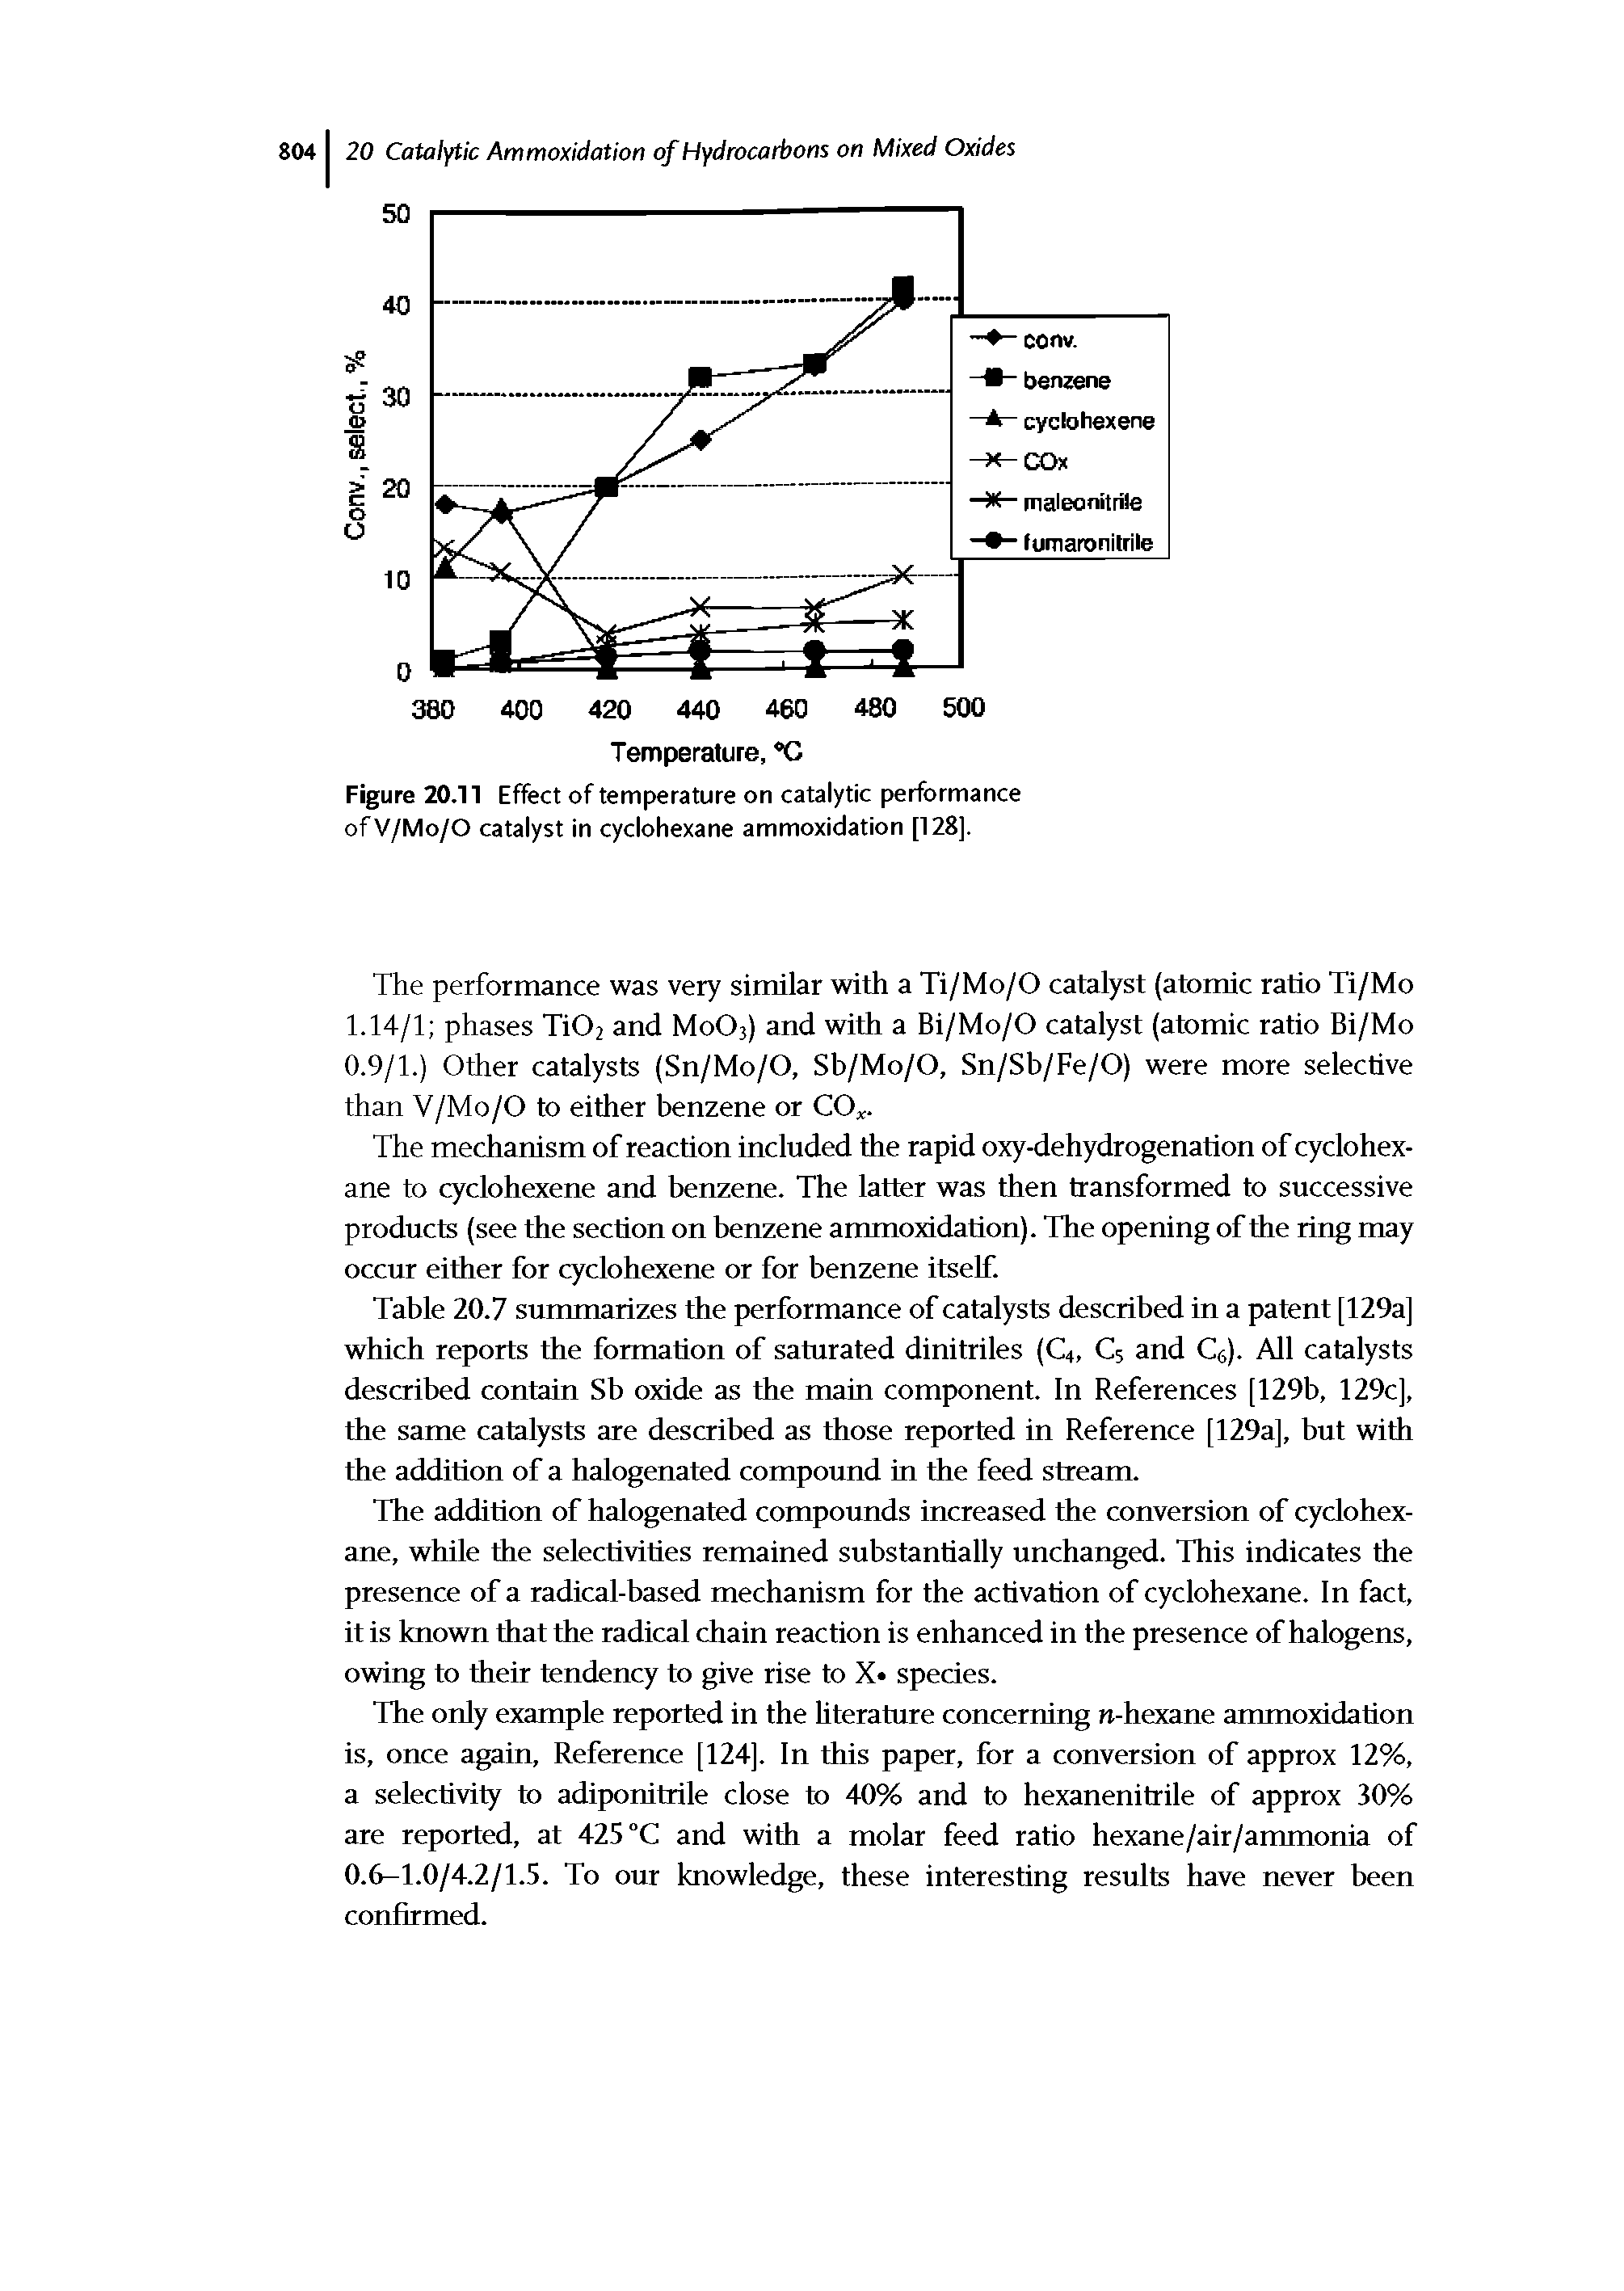 Figure 20.11 Effect of temperature on catalytic performance ofV/Mo/O catalyst in cyclohexane ammoxidation [128].